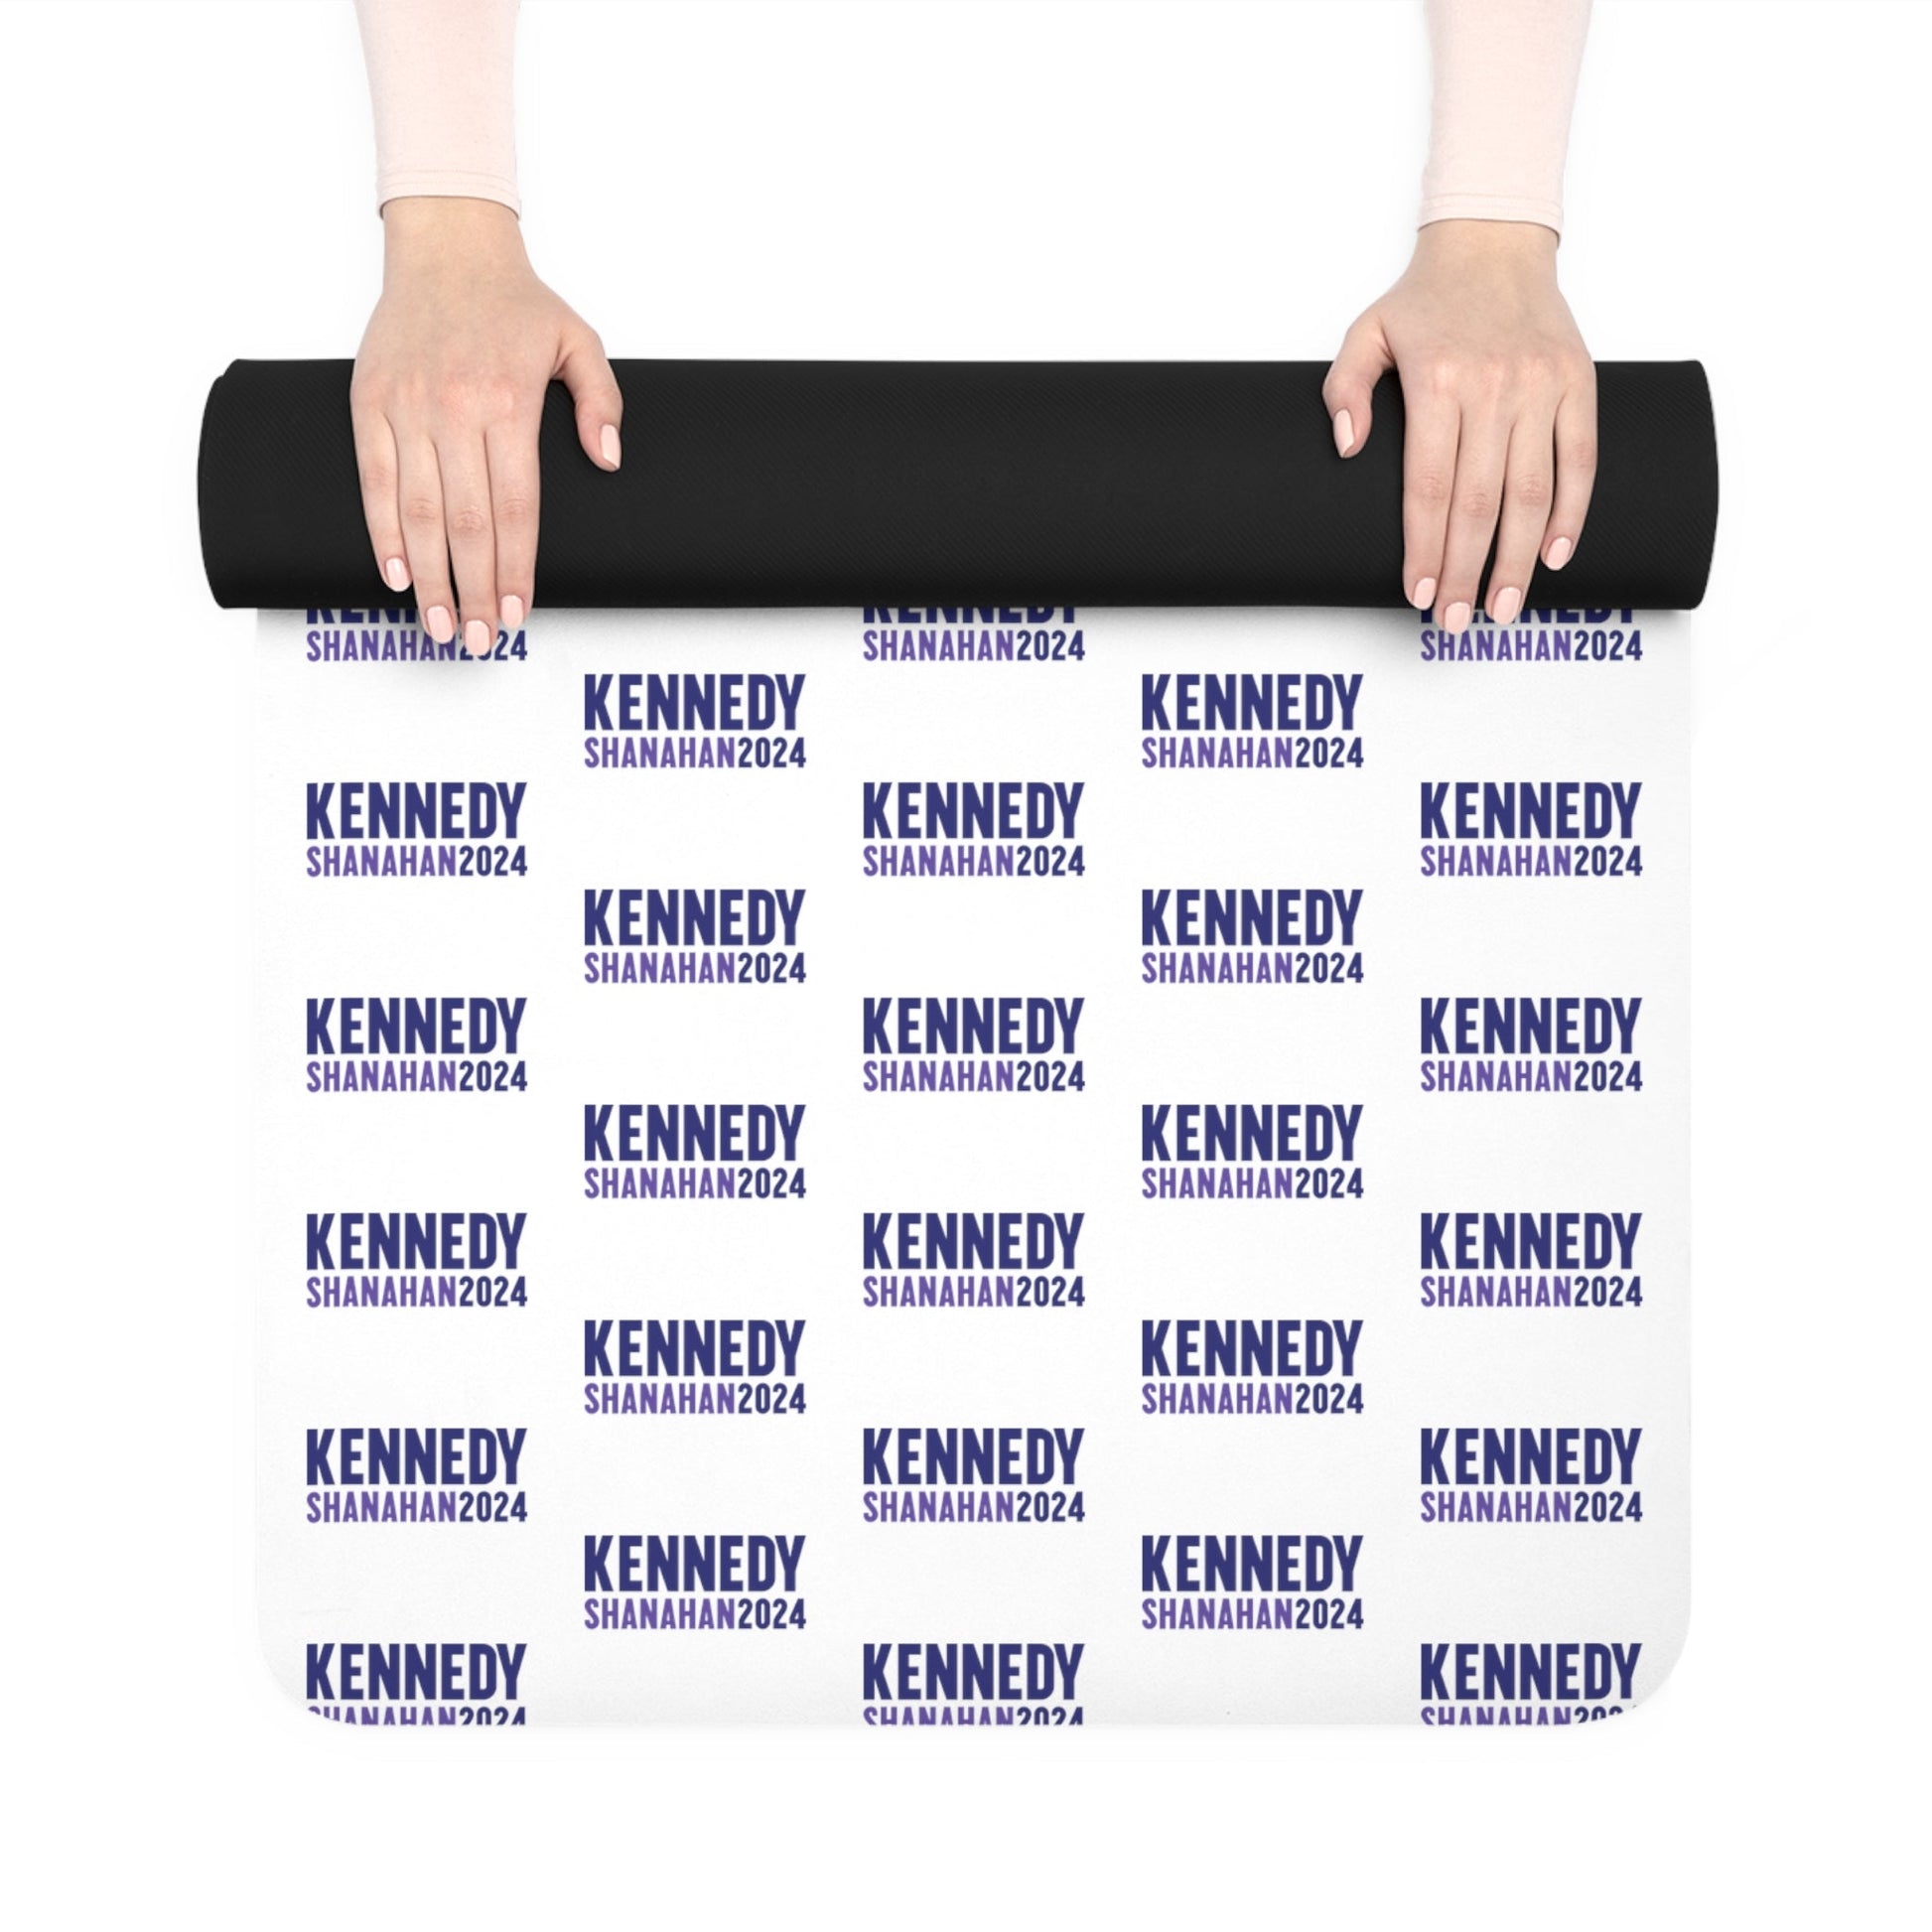 Kennedy Shanahan II Yoga Mat - TEAM KENNEDY. All rights reserved